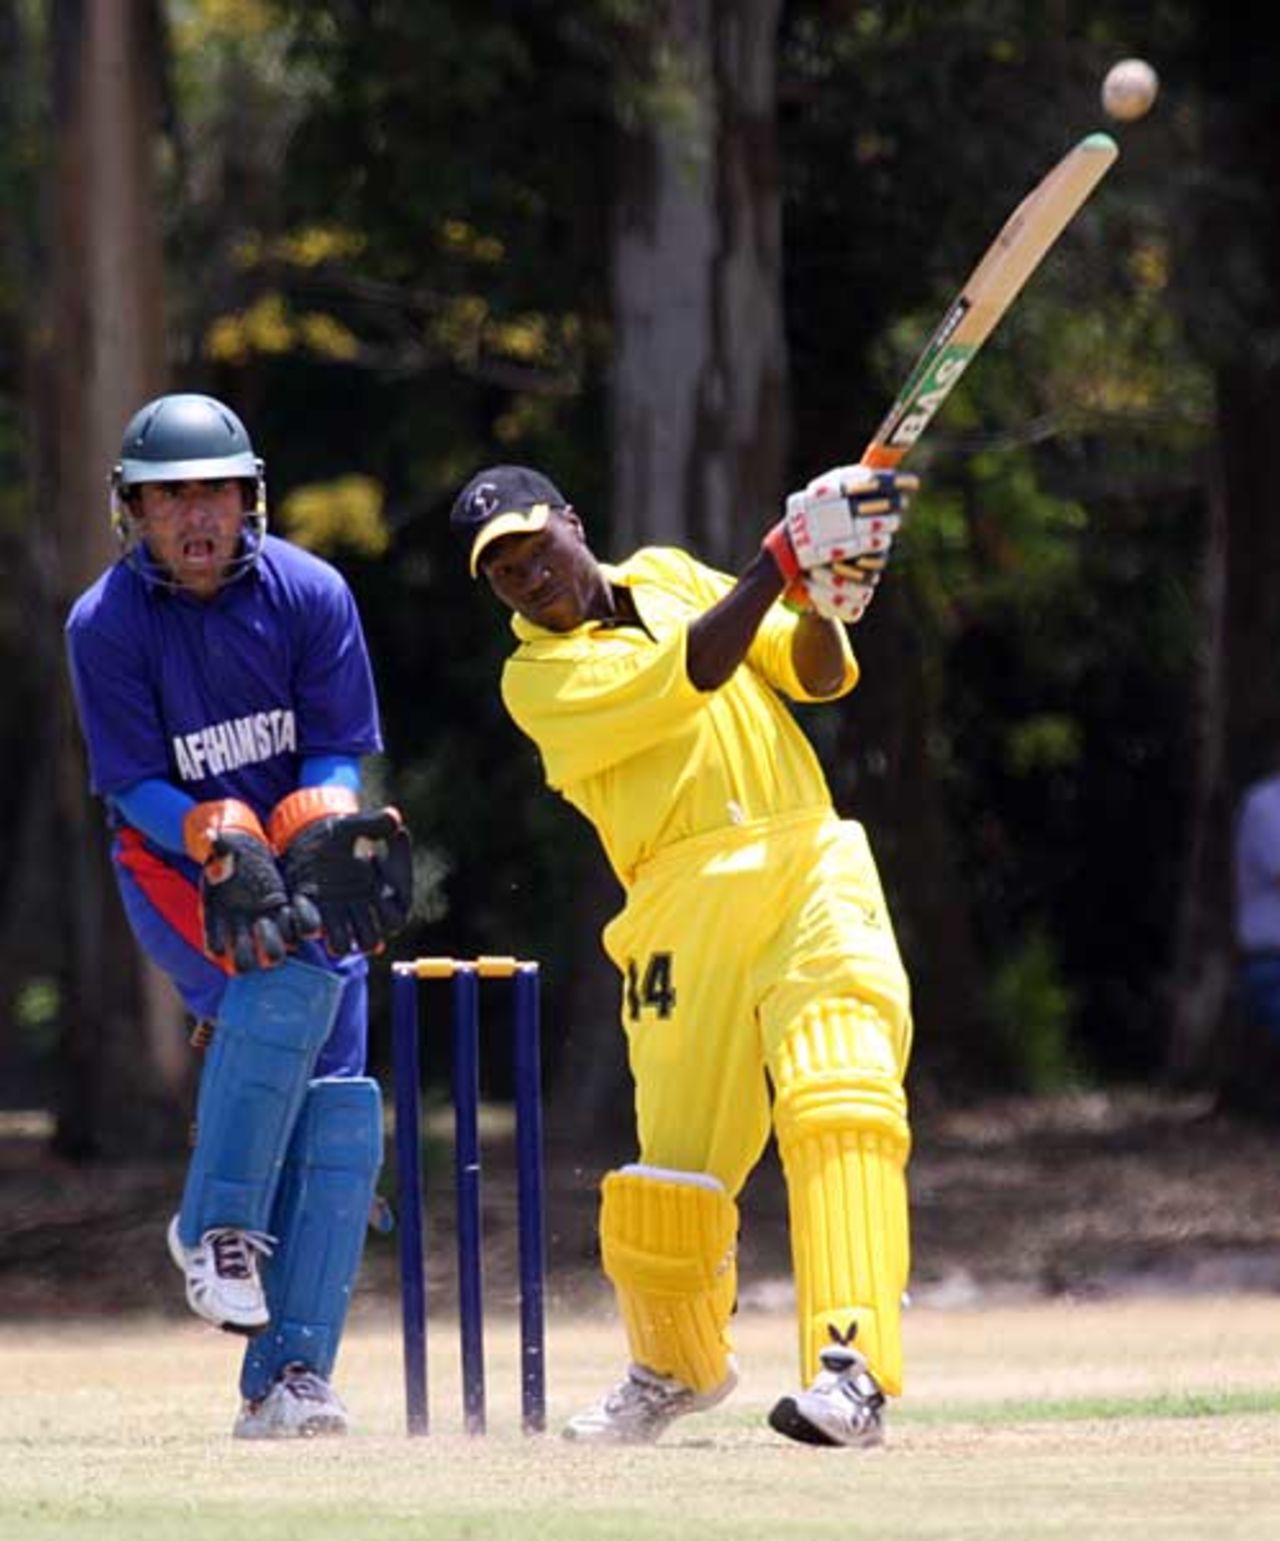 Frank Nsubuga launches one of his three sixes in his 62 off 44 balls, Uganda v Afghanistan, Buenos Aires, January 24, 2009